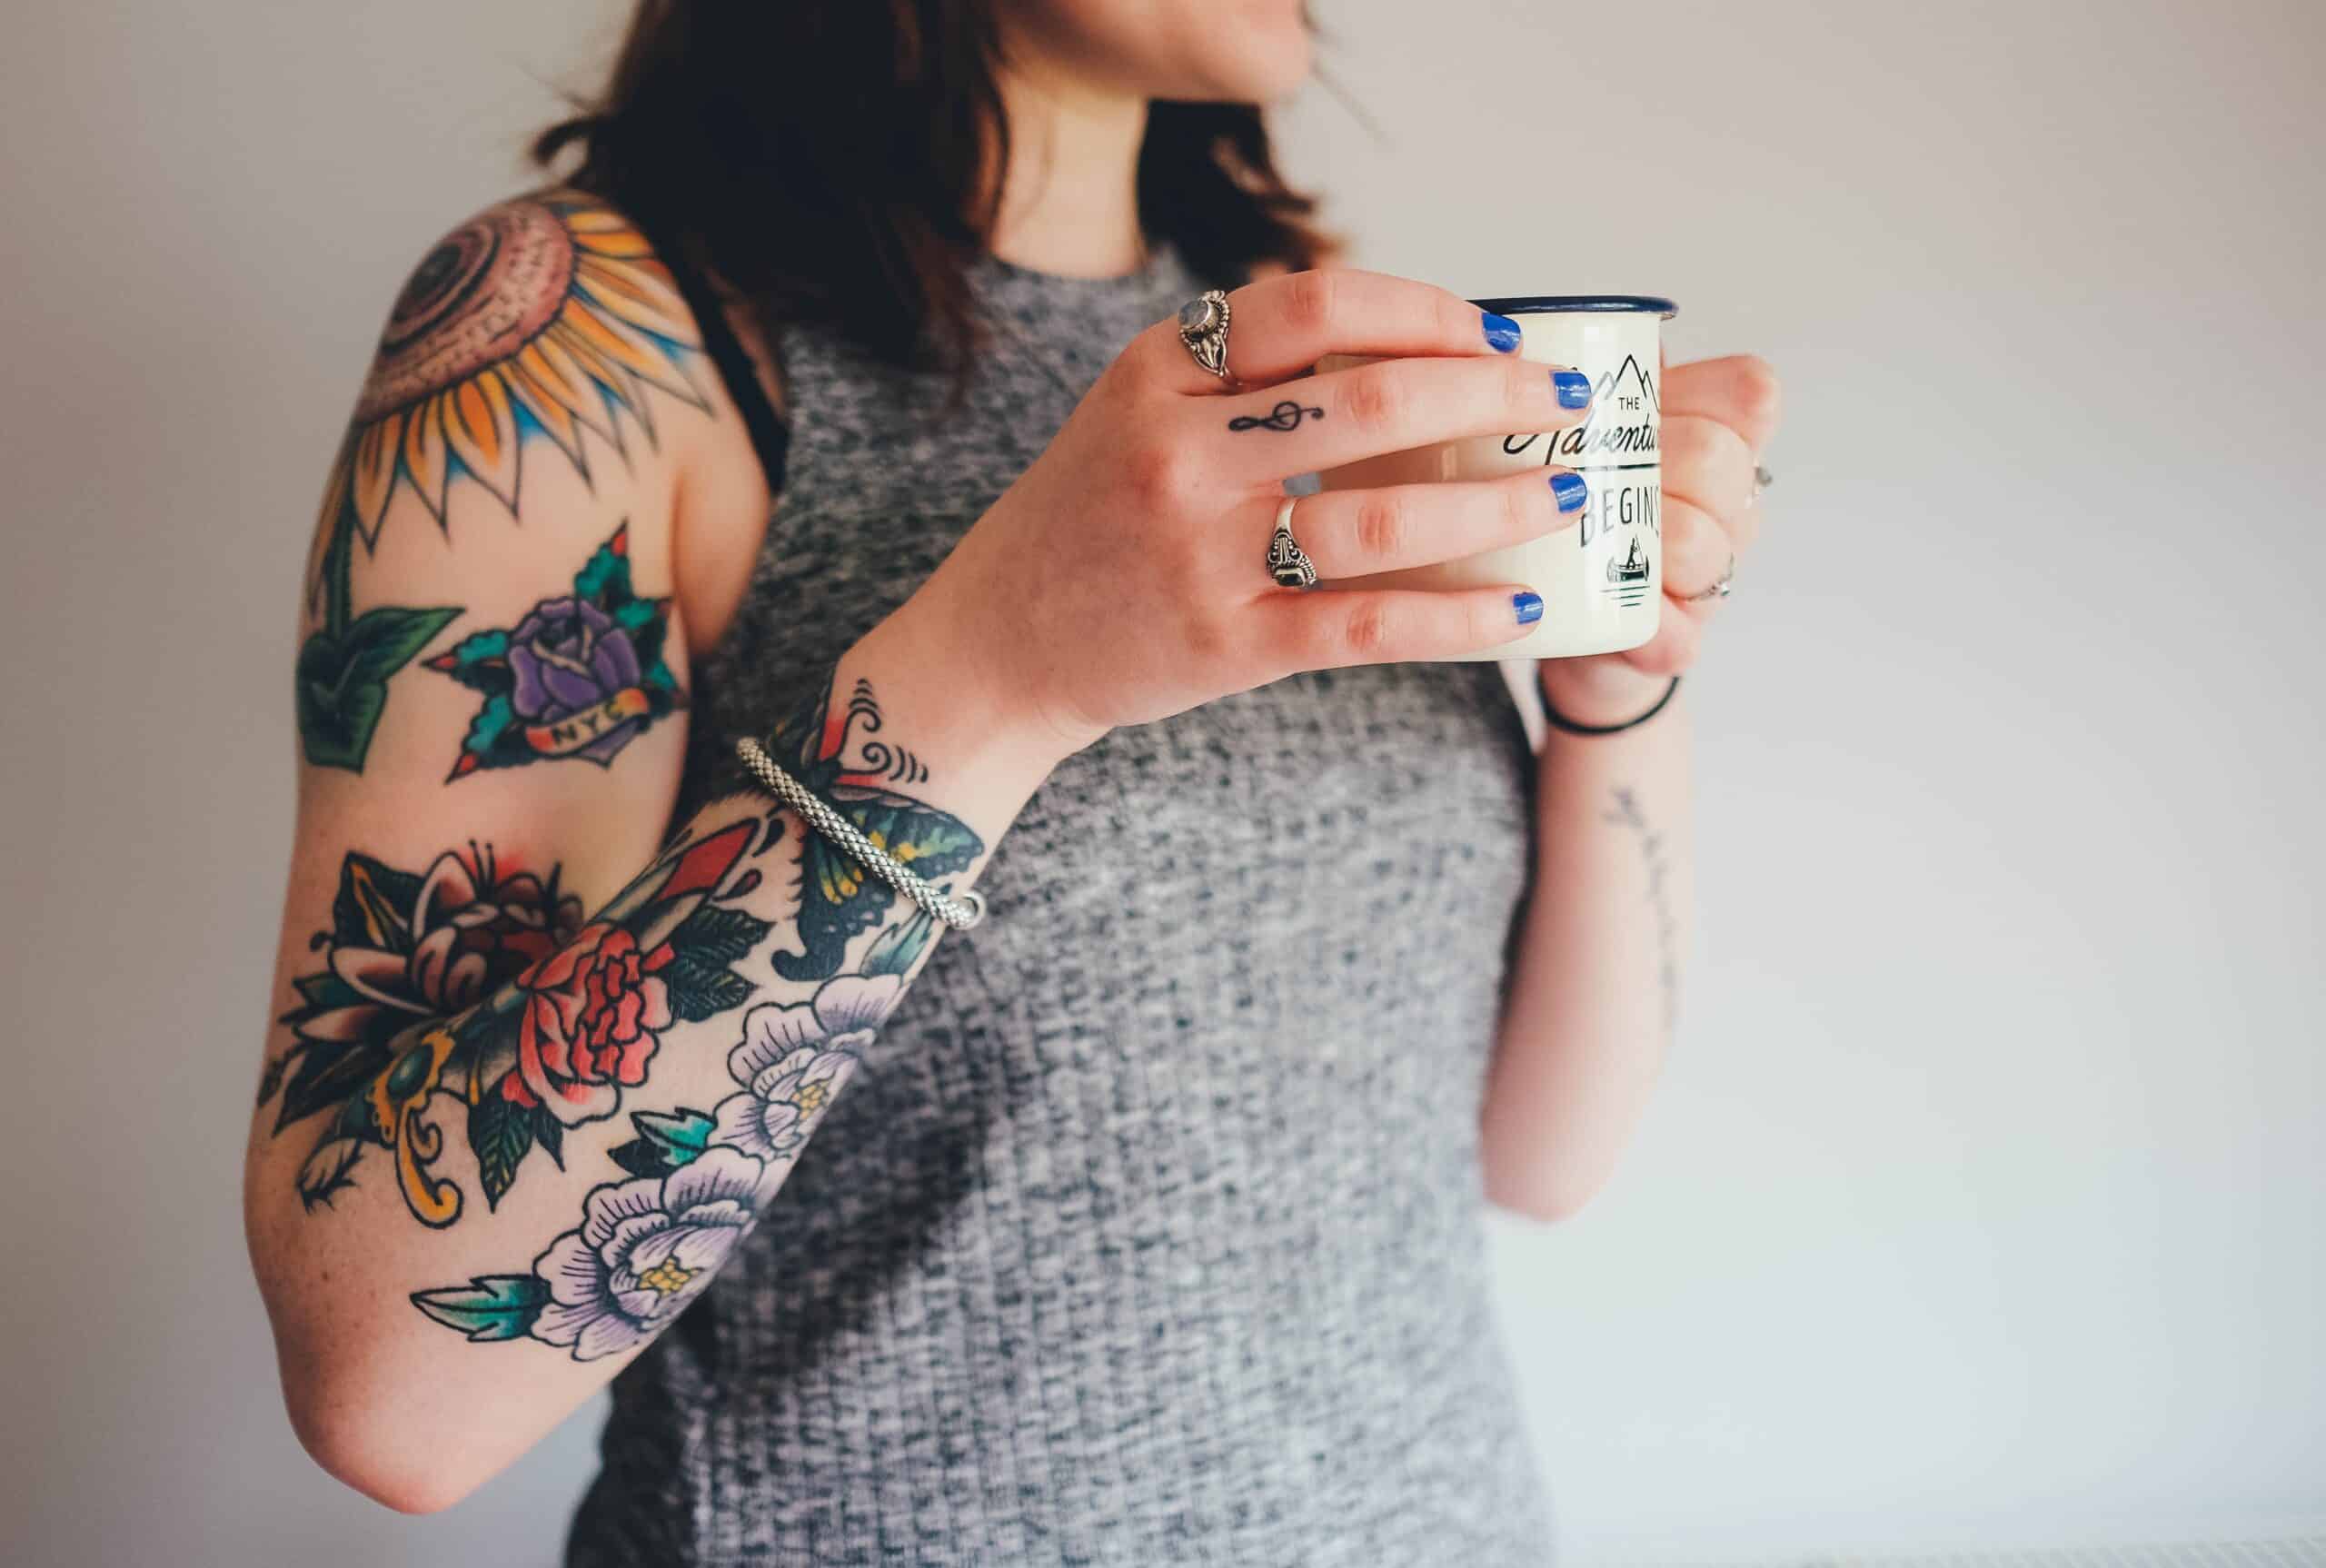 Women showing her arm tattoos